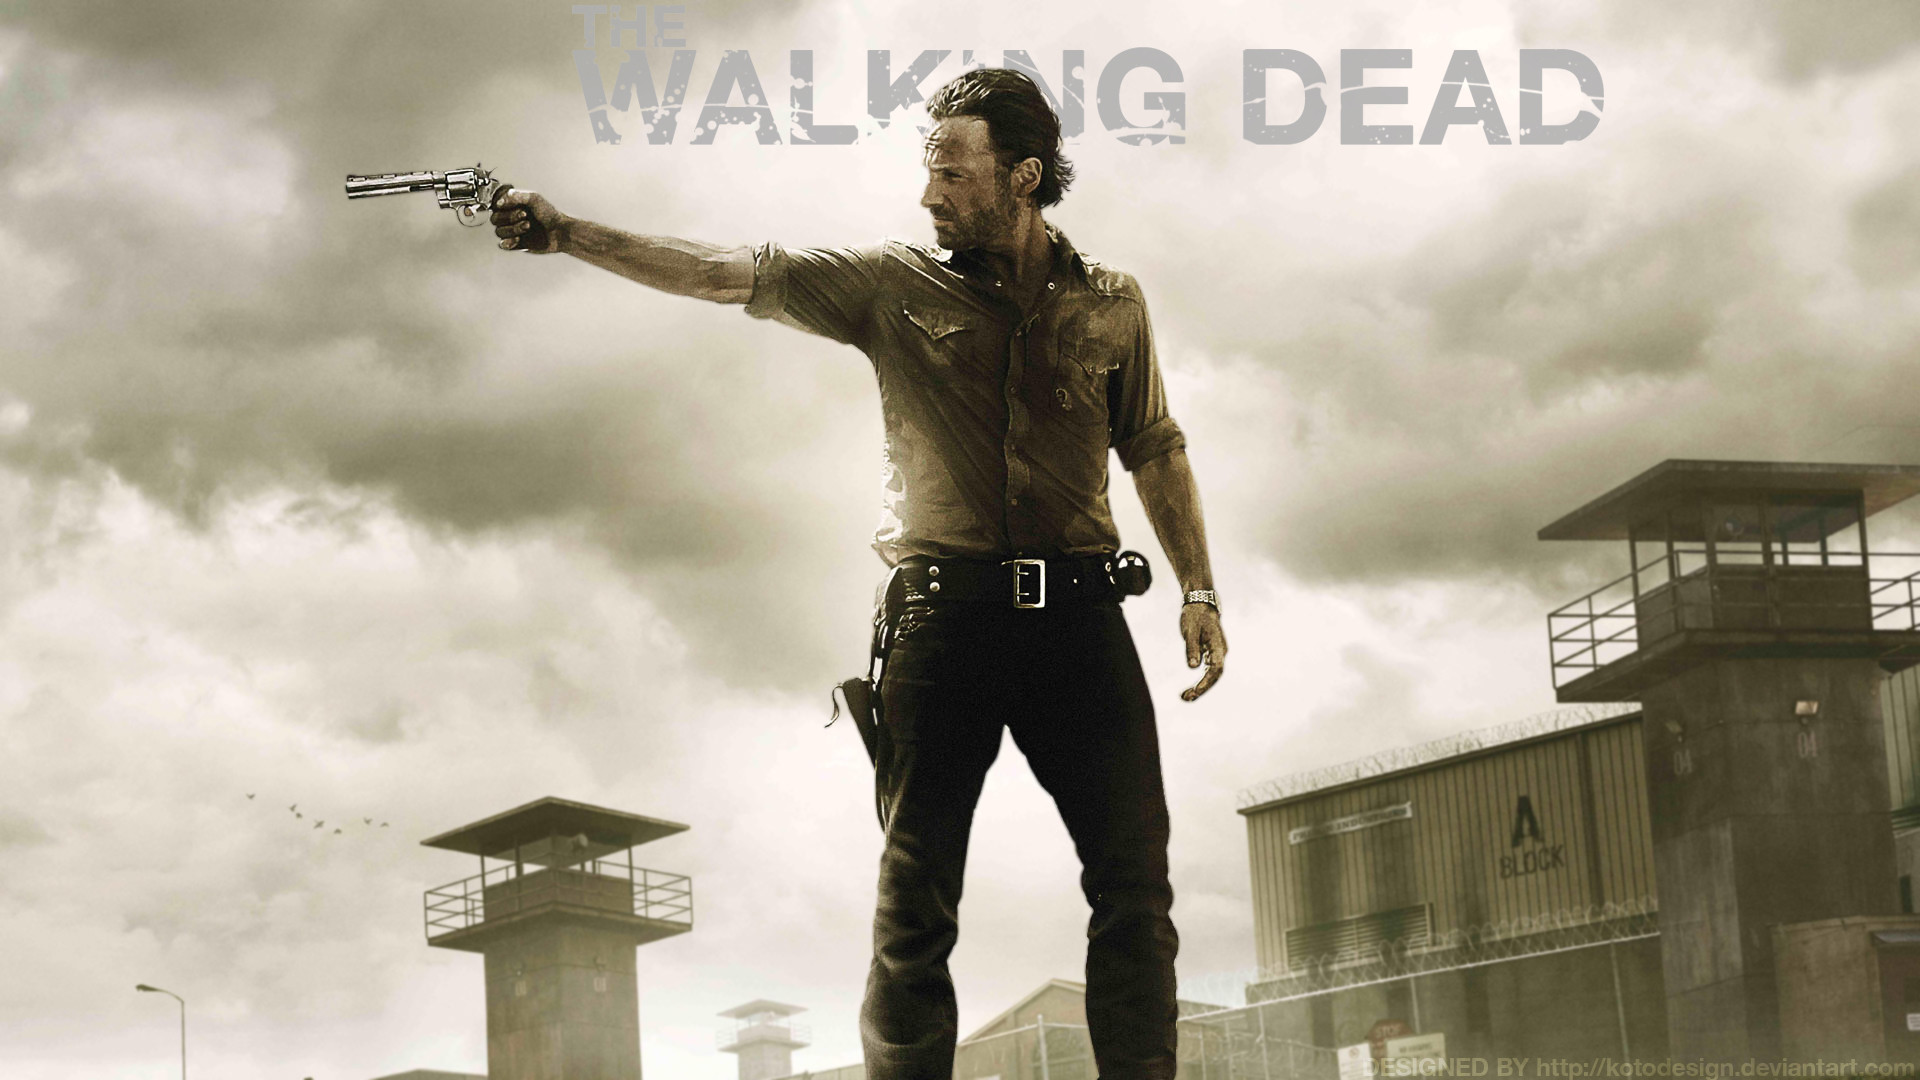 The Walking Dead wallpapers for iPhone and iPad 19201080